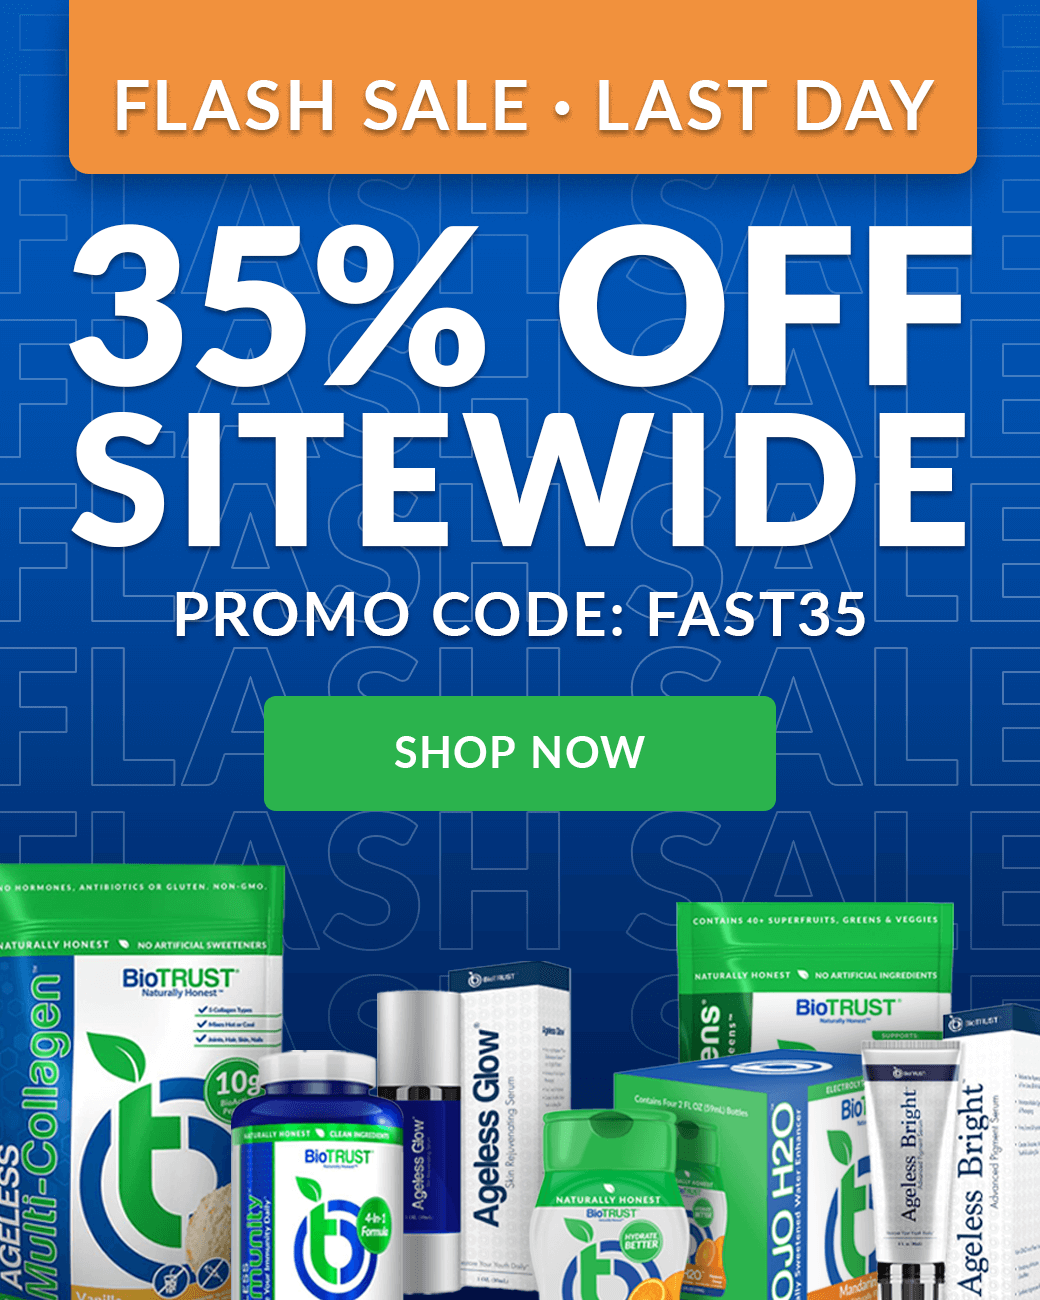 LIMITED TIME: Save 35% sitewide with code FAST35 - no limits or minimums!